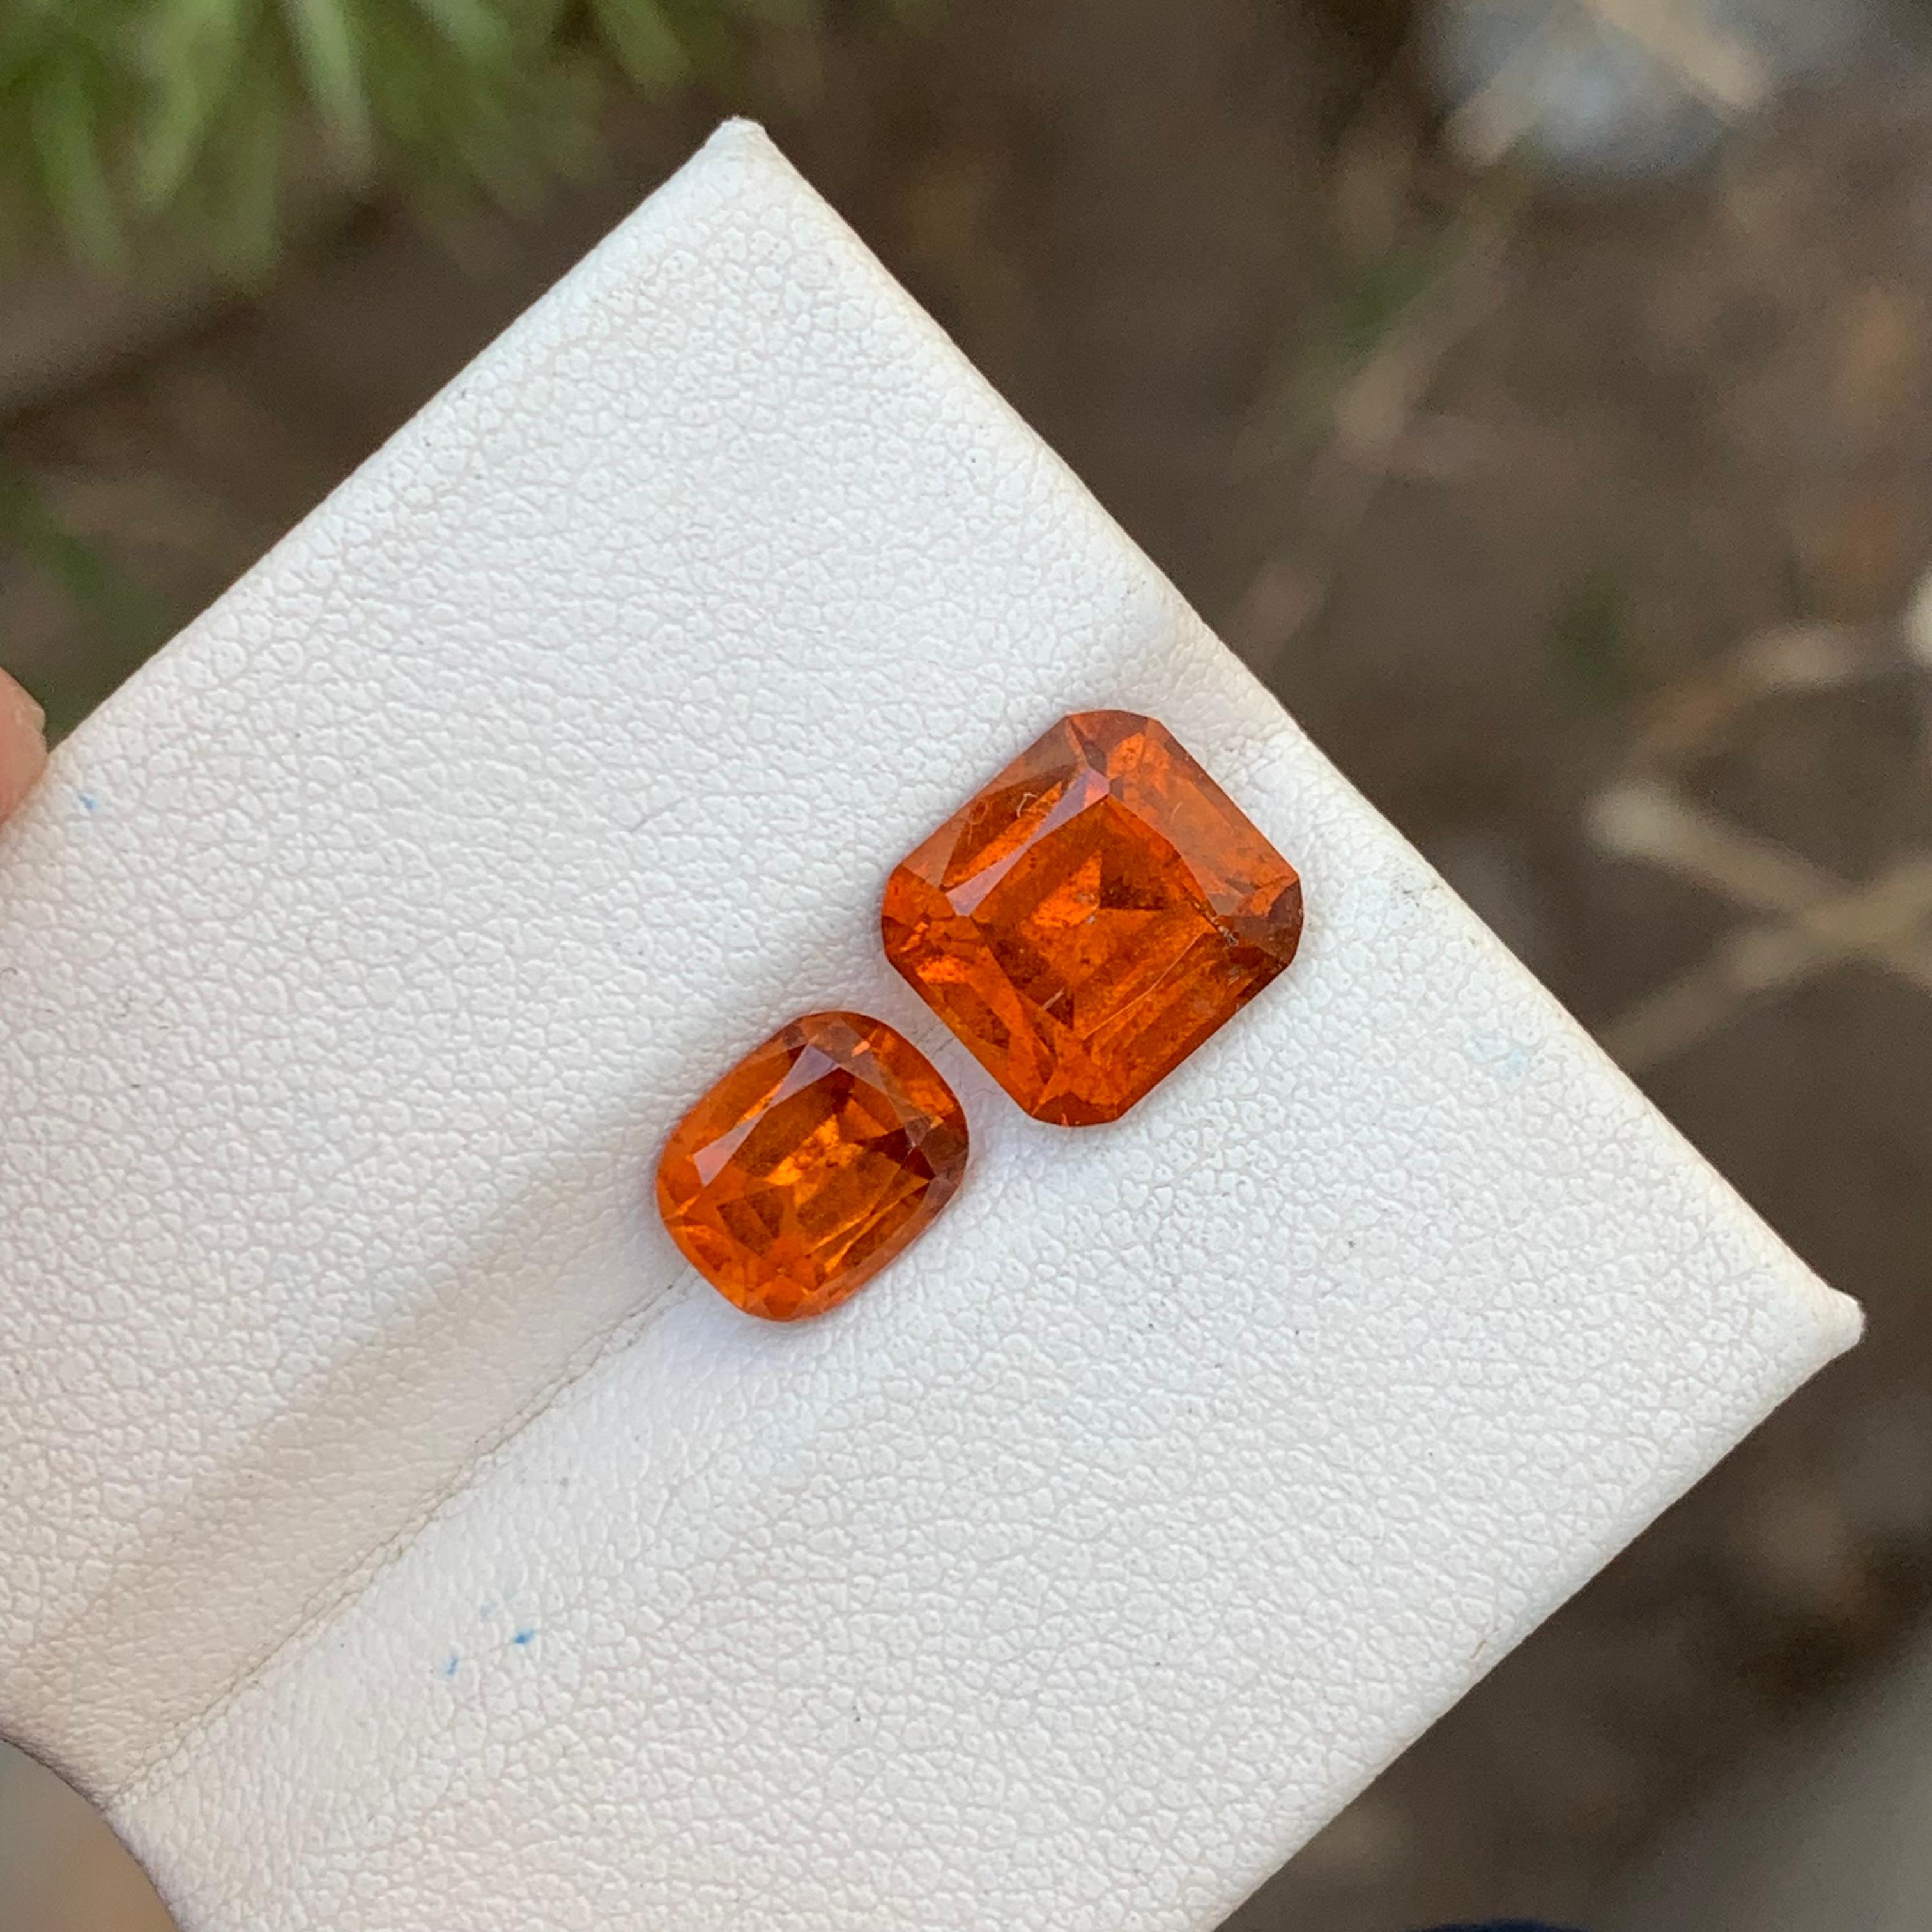 5.95 Carats Natural Loose Hessonite Garnet 2 Pieces For Ring Jewelry Making  en vente 4